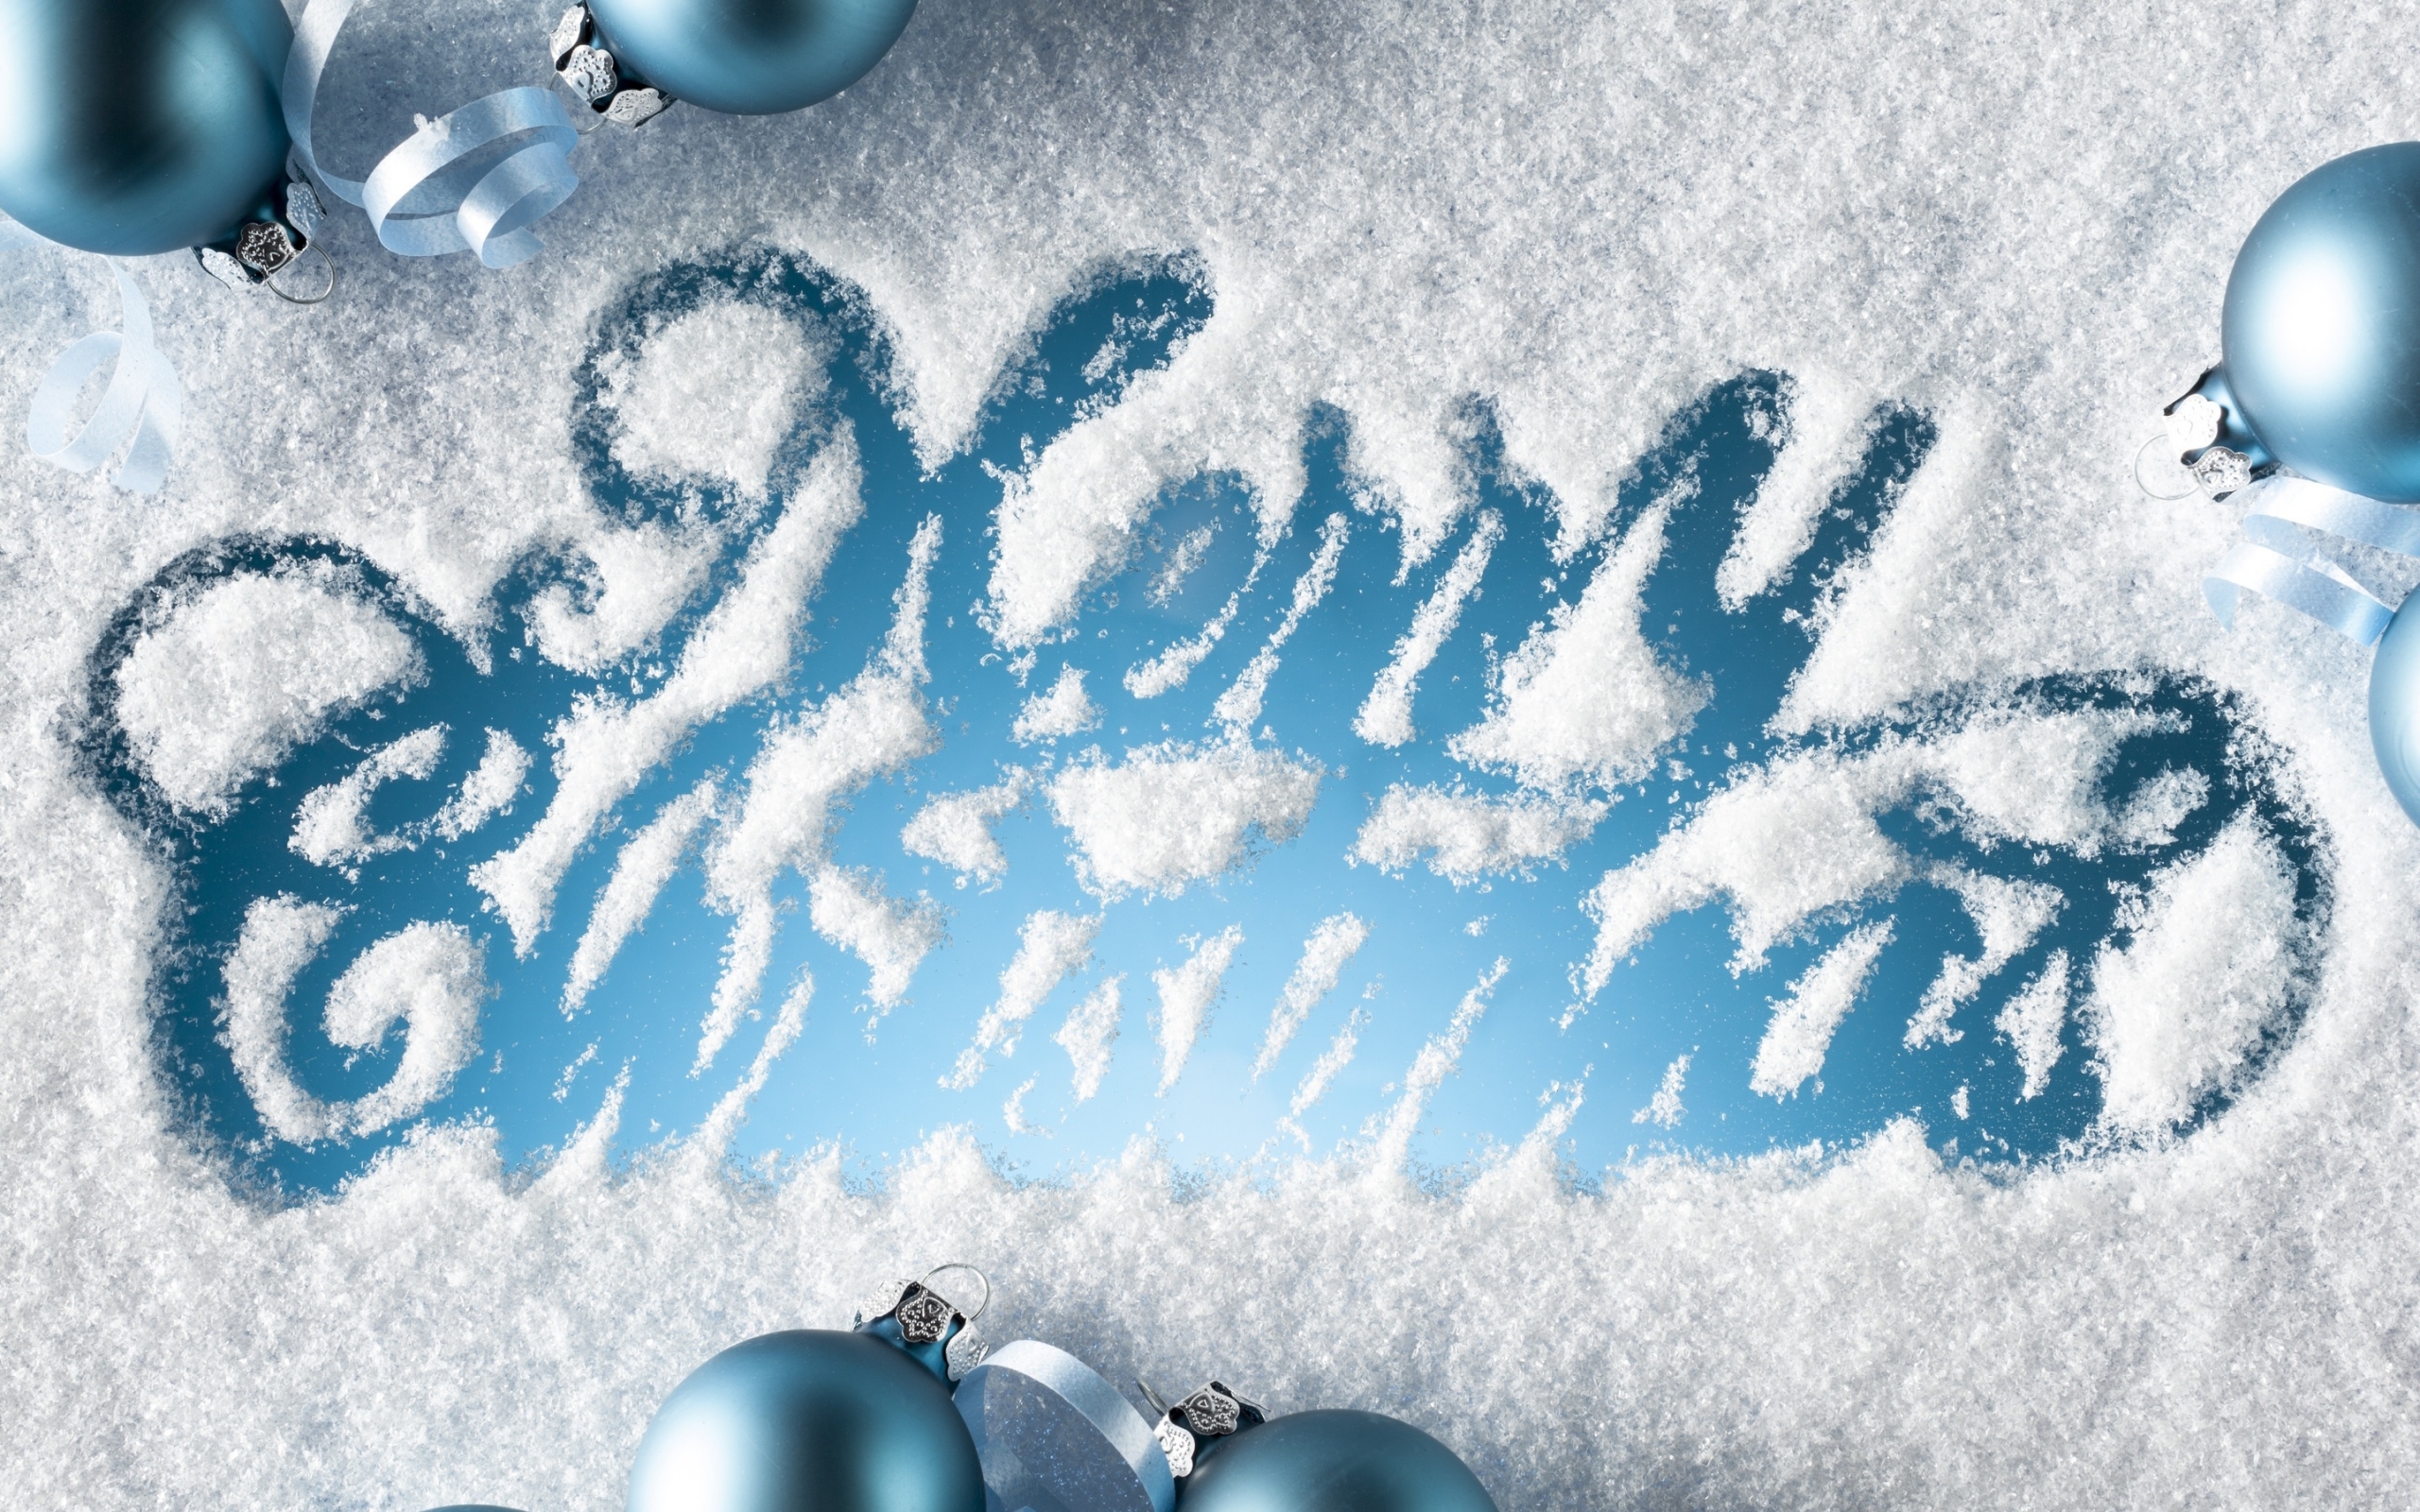 Just Merry Christmas Everyone for 2560 x 1600 widescreen resolution